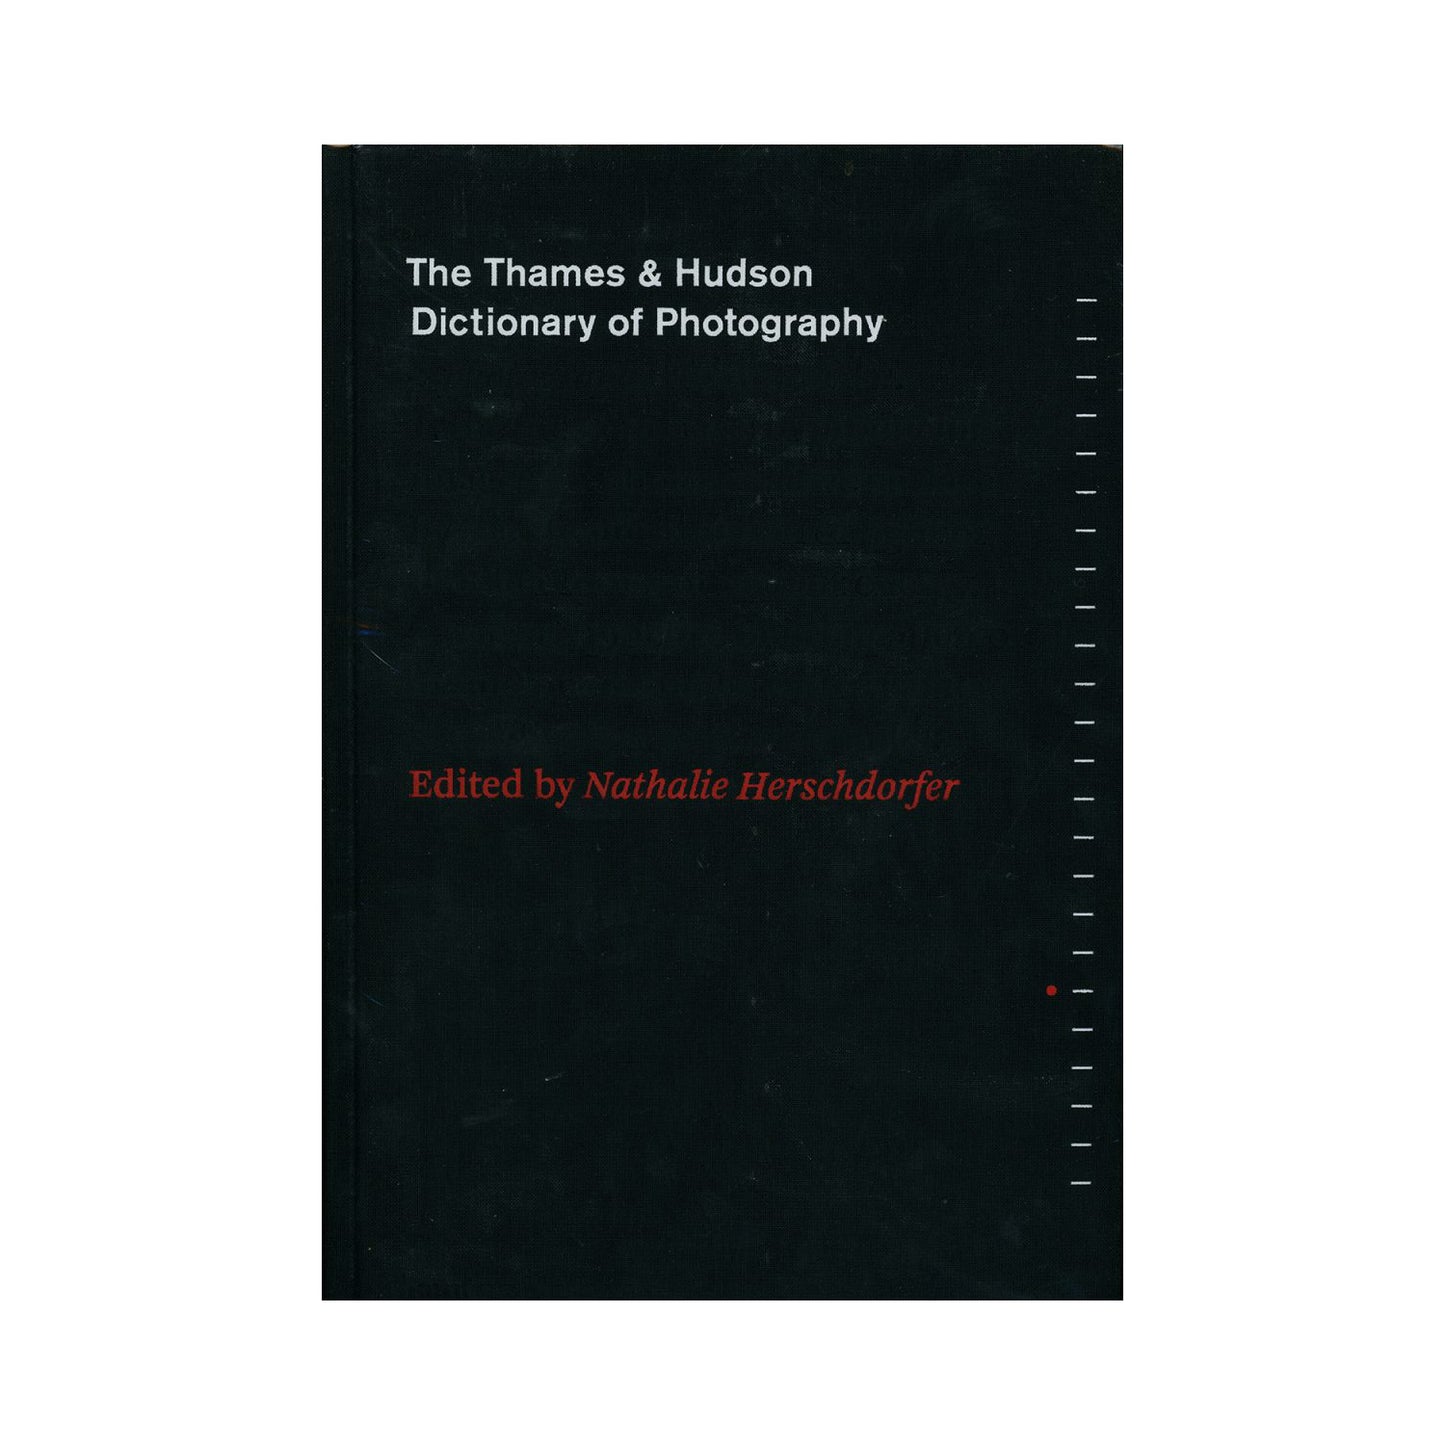 The Thames & Hudson Dictionary of Photography by Nathalie Herschdorfer